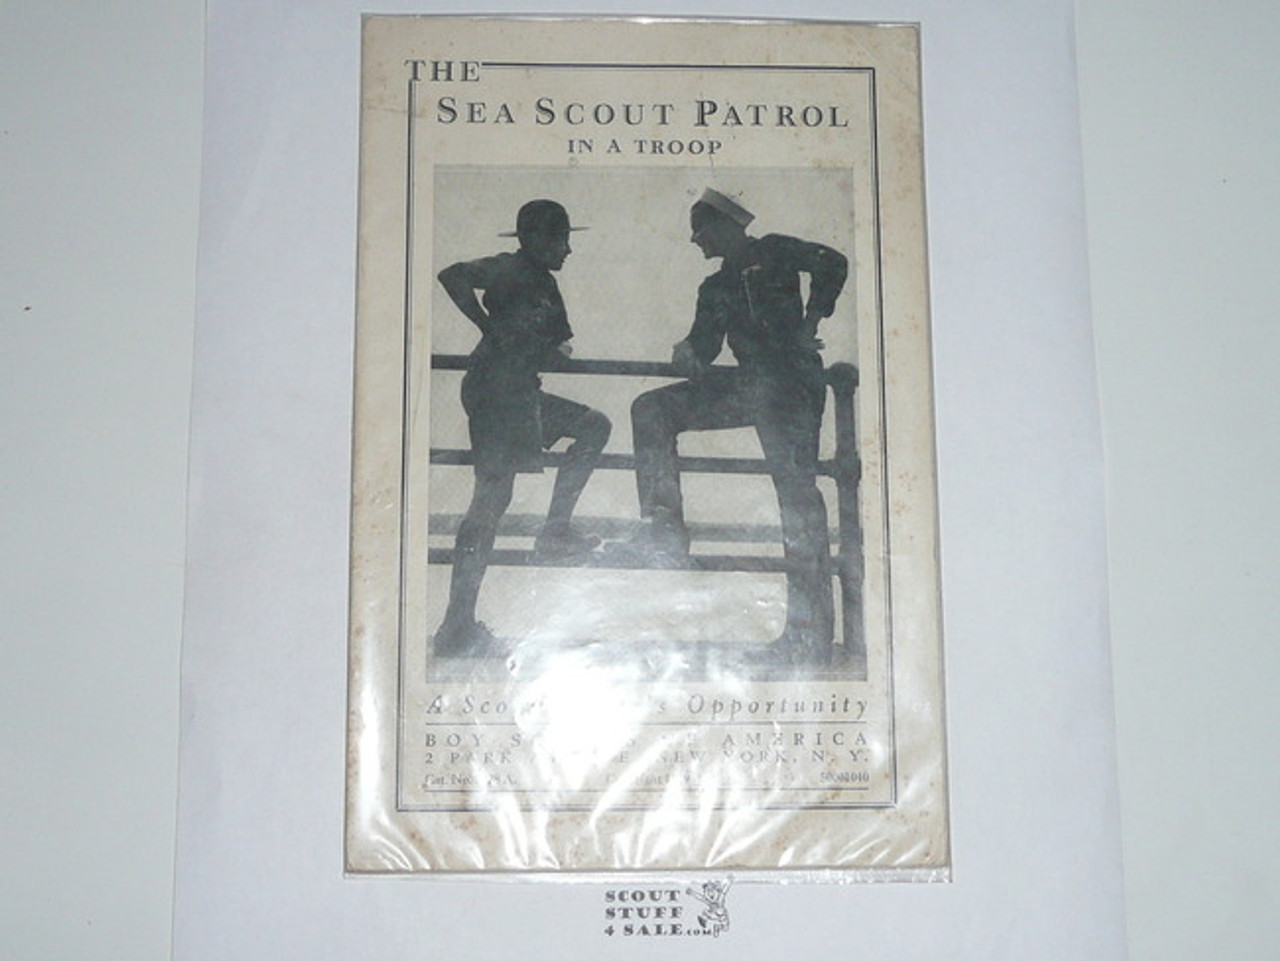 The Sea Scout Patrol in a Troop, 10-40 Printing, Boy Scout Service Library, No Cover Printing